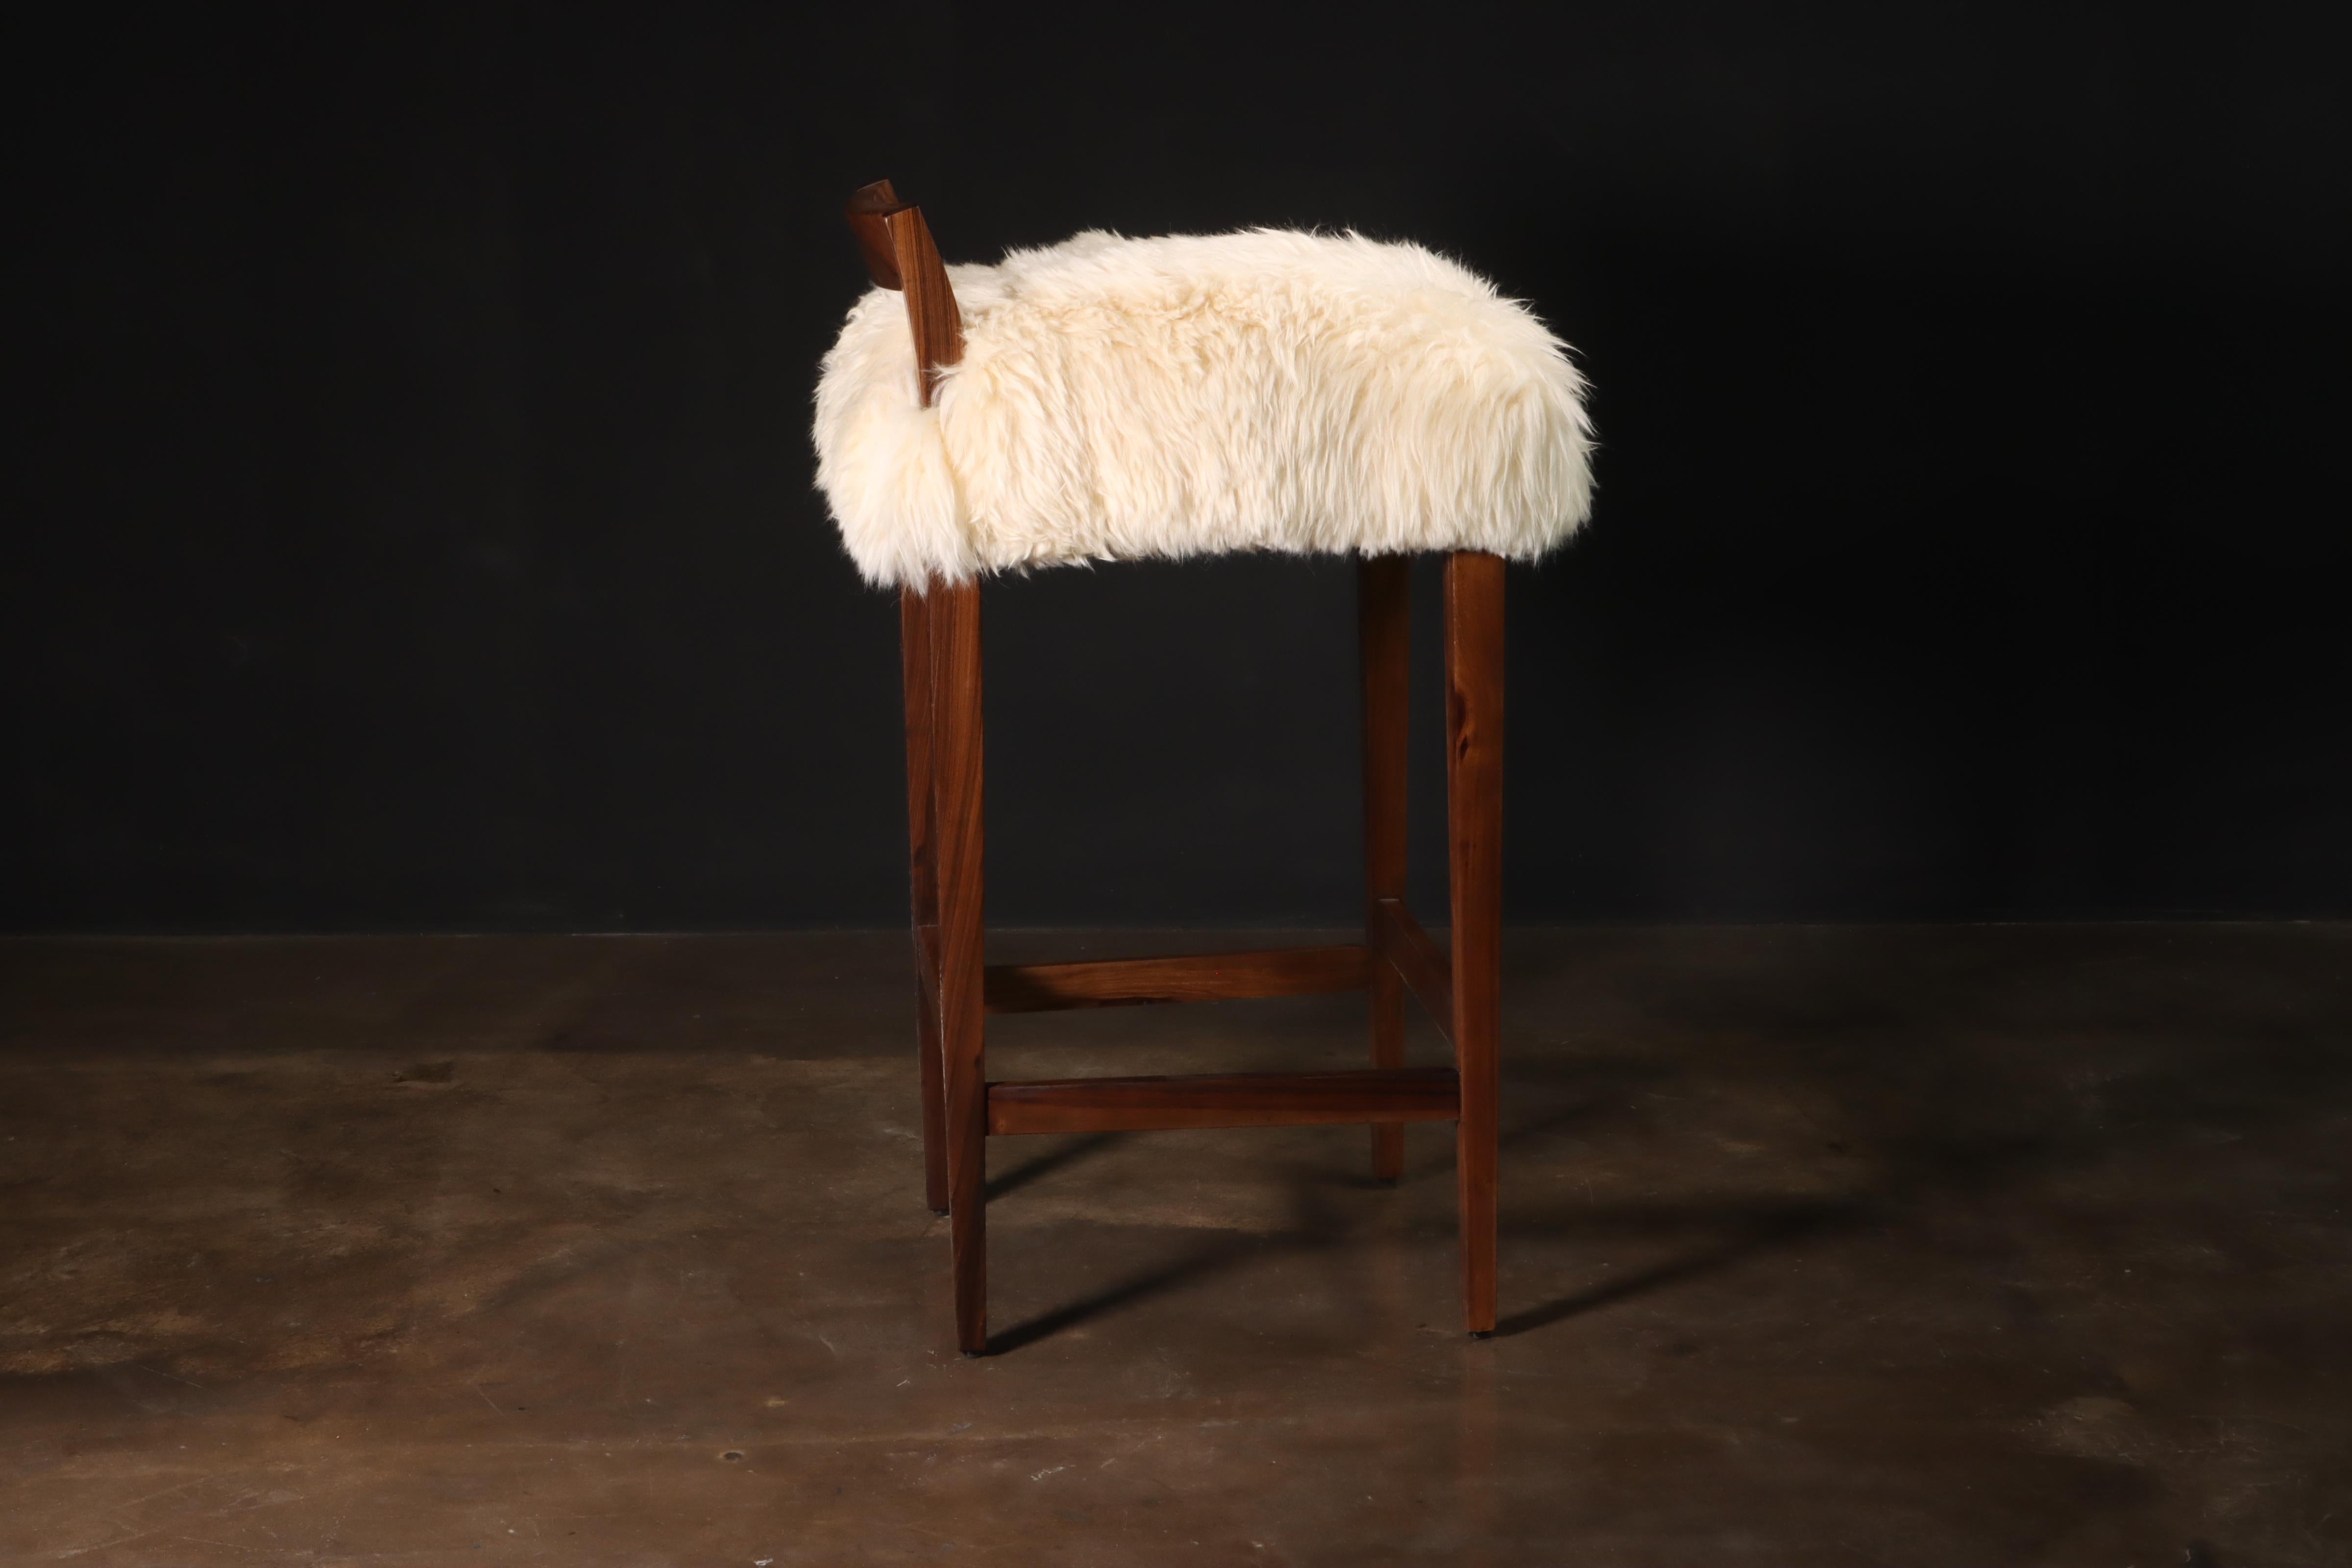 Argentine Sheepskin and Exotic Wood Contemporary Low Back Stool from Costantini, Umberto For Sale